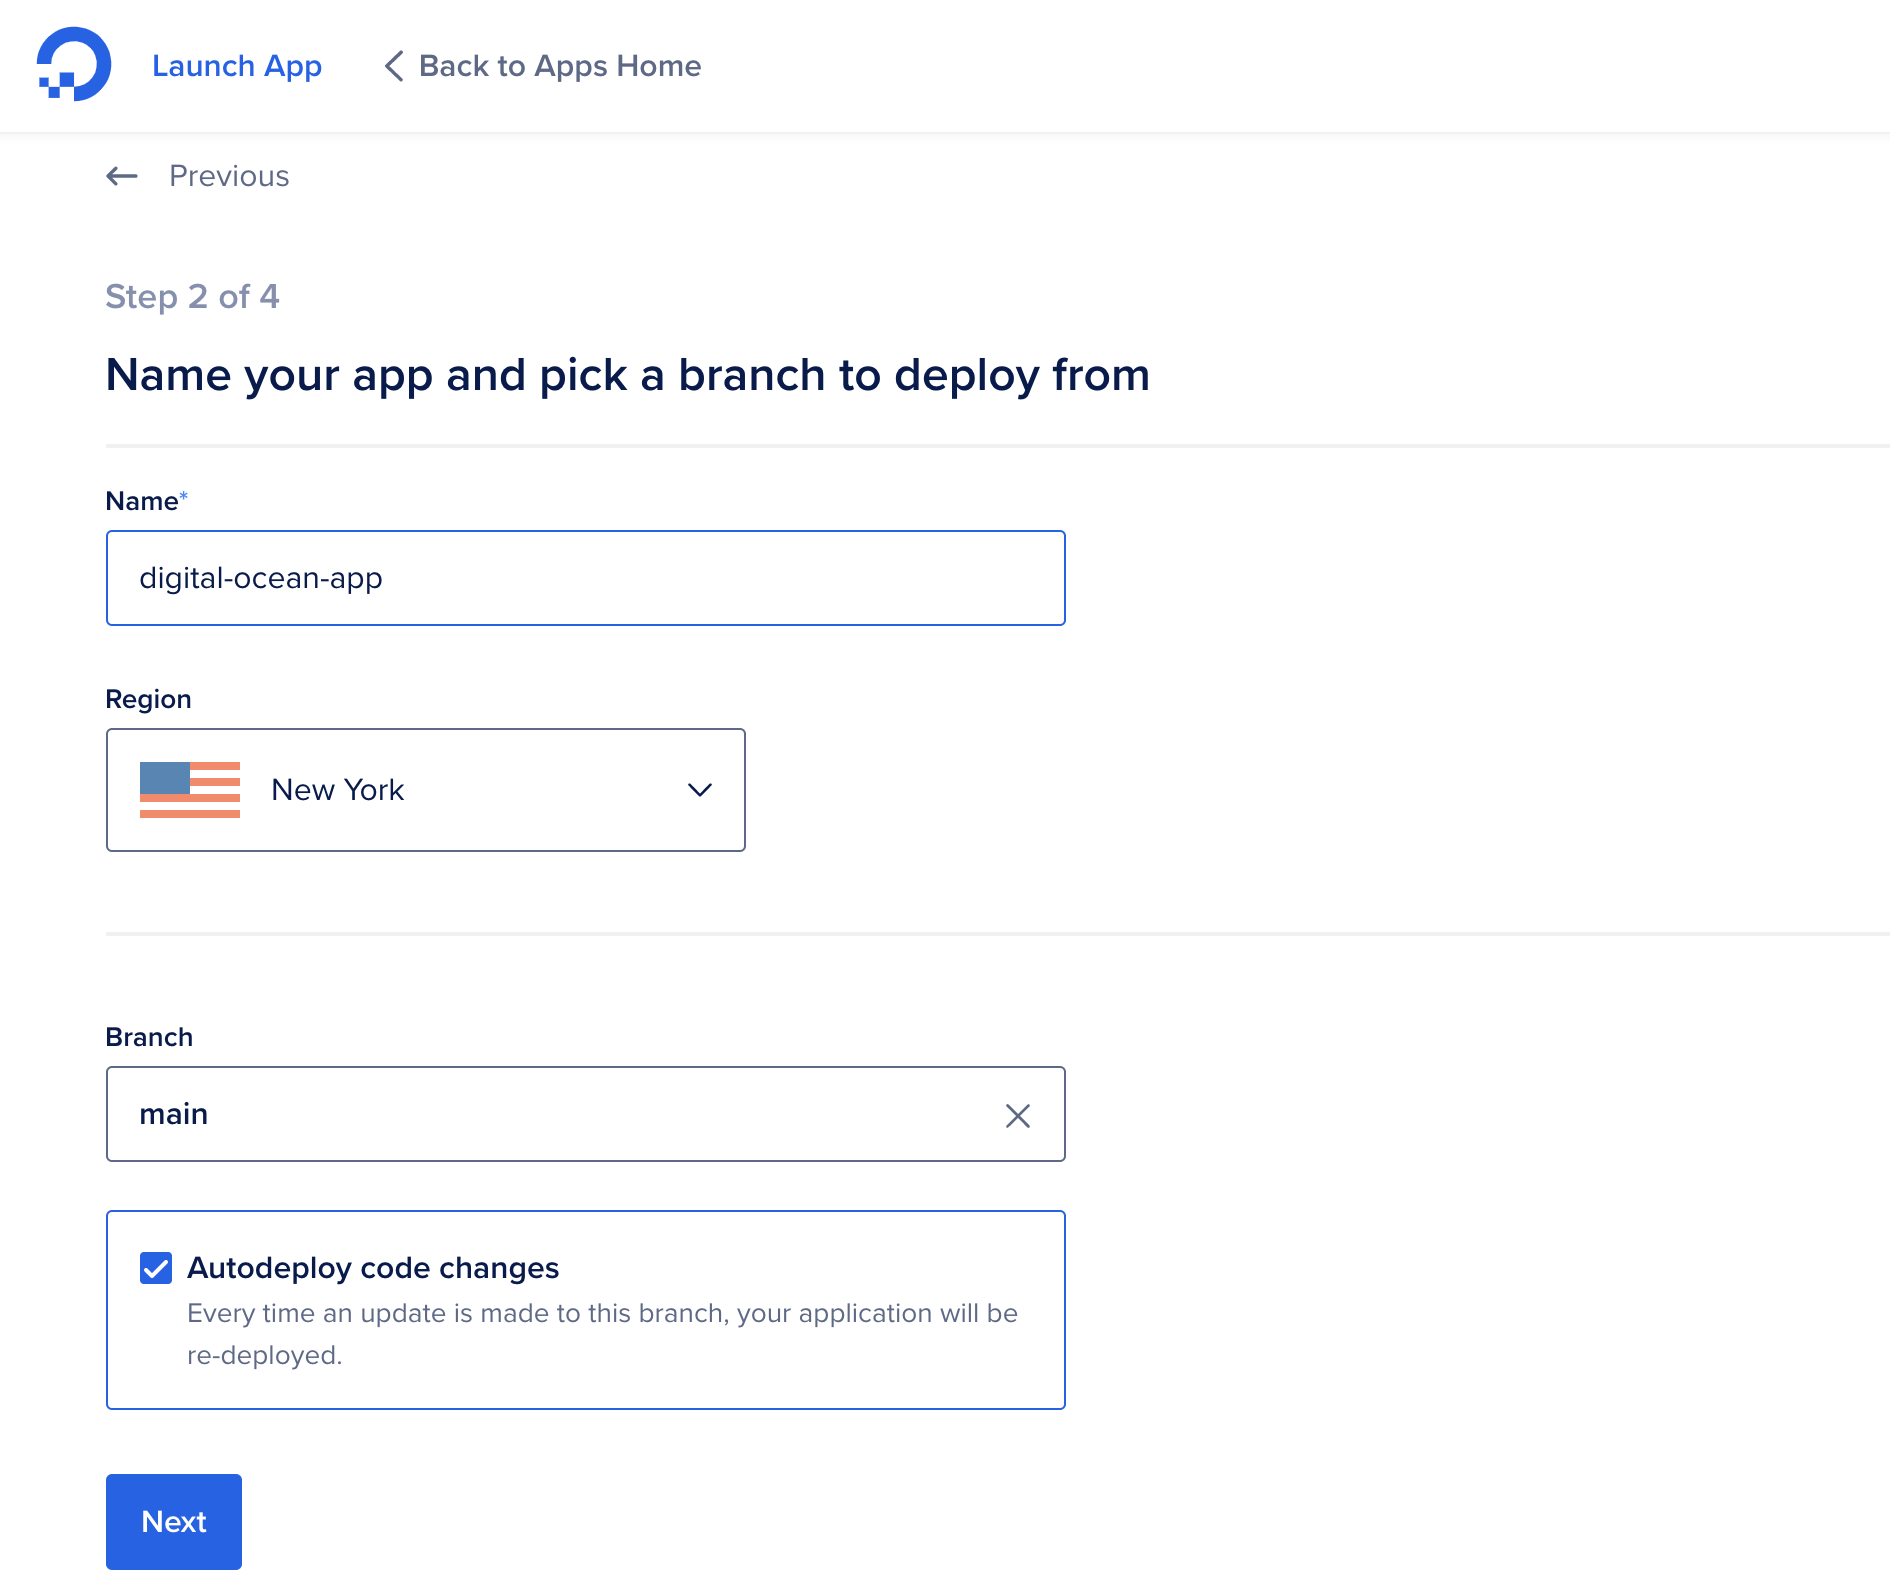 Select branch and location in the DigitalOcean interface